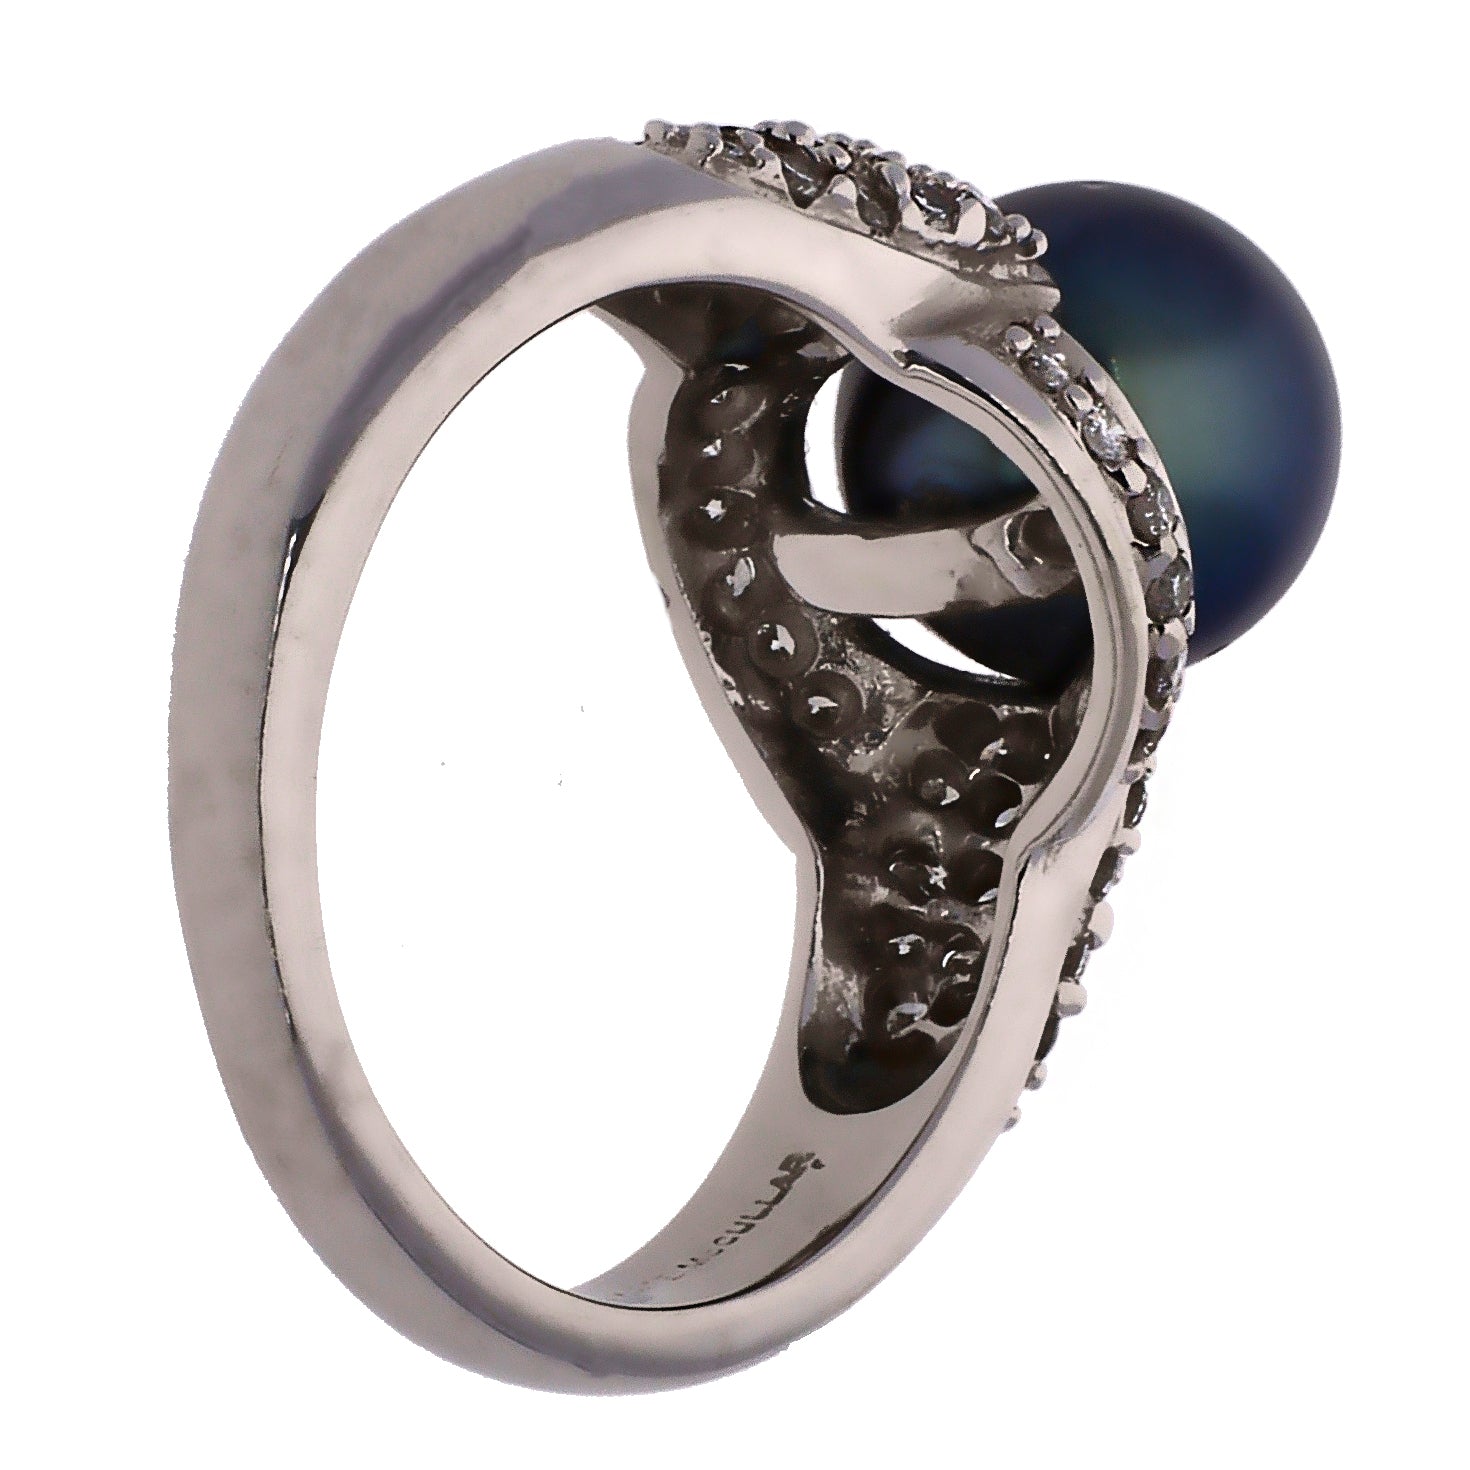 14K White Gold 9mm Black Pearl and Diamond Ring